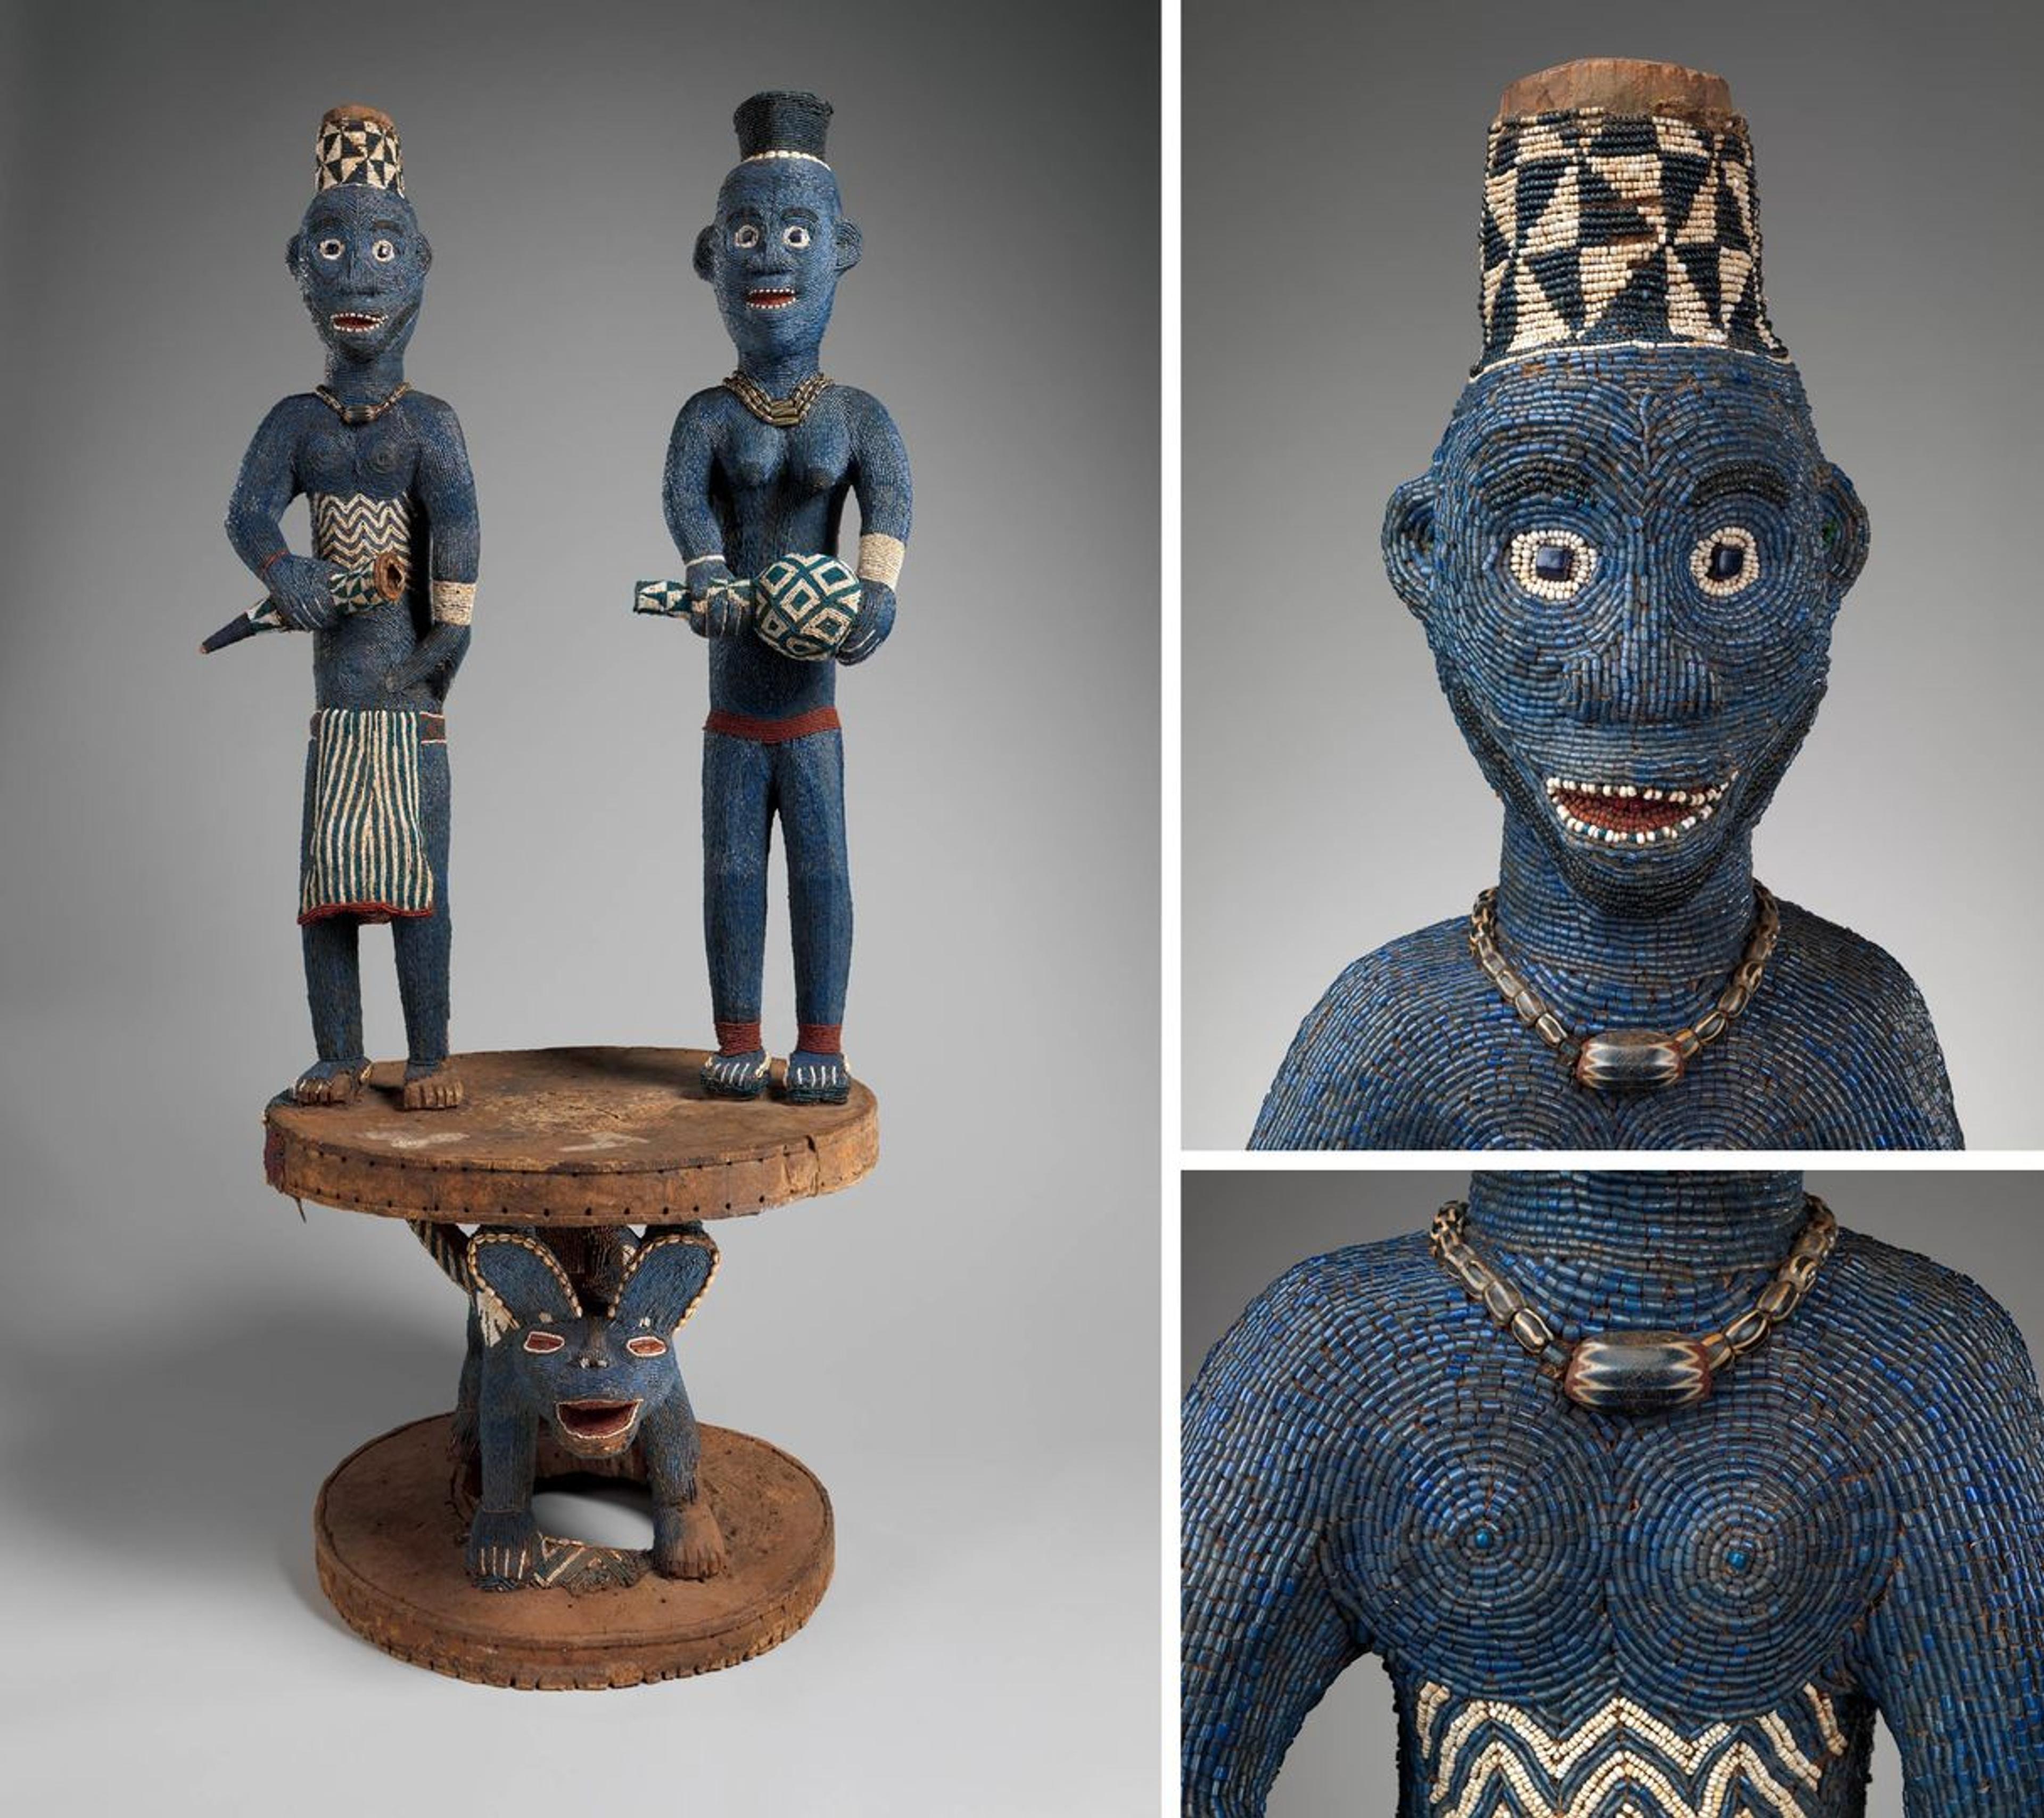 A spectacular sculpture made of wood and glass beads depicting a royal couple enthroned